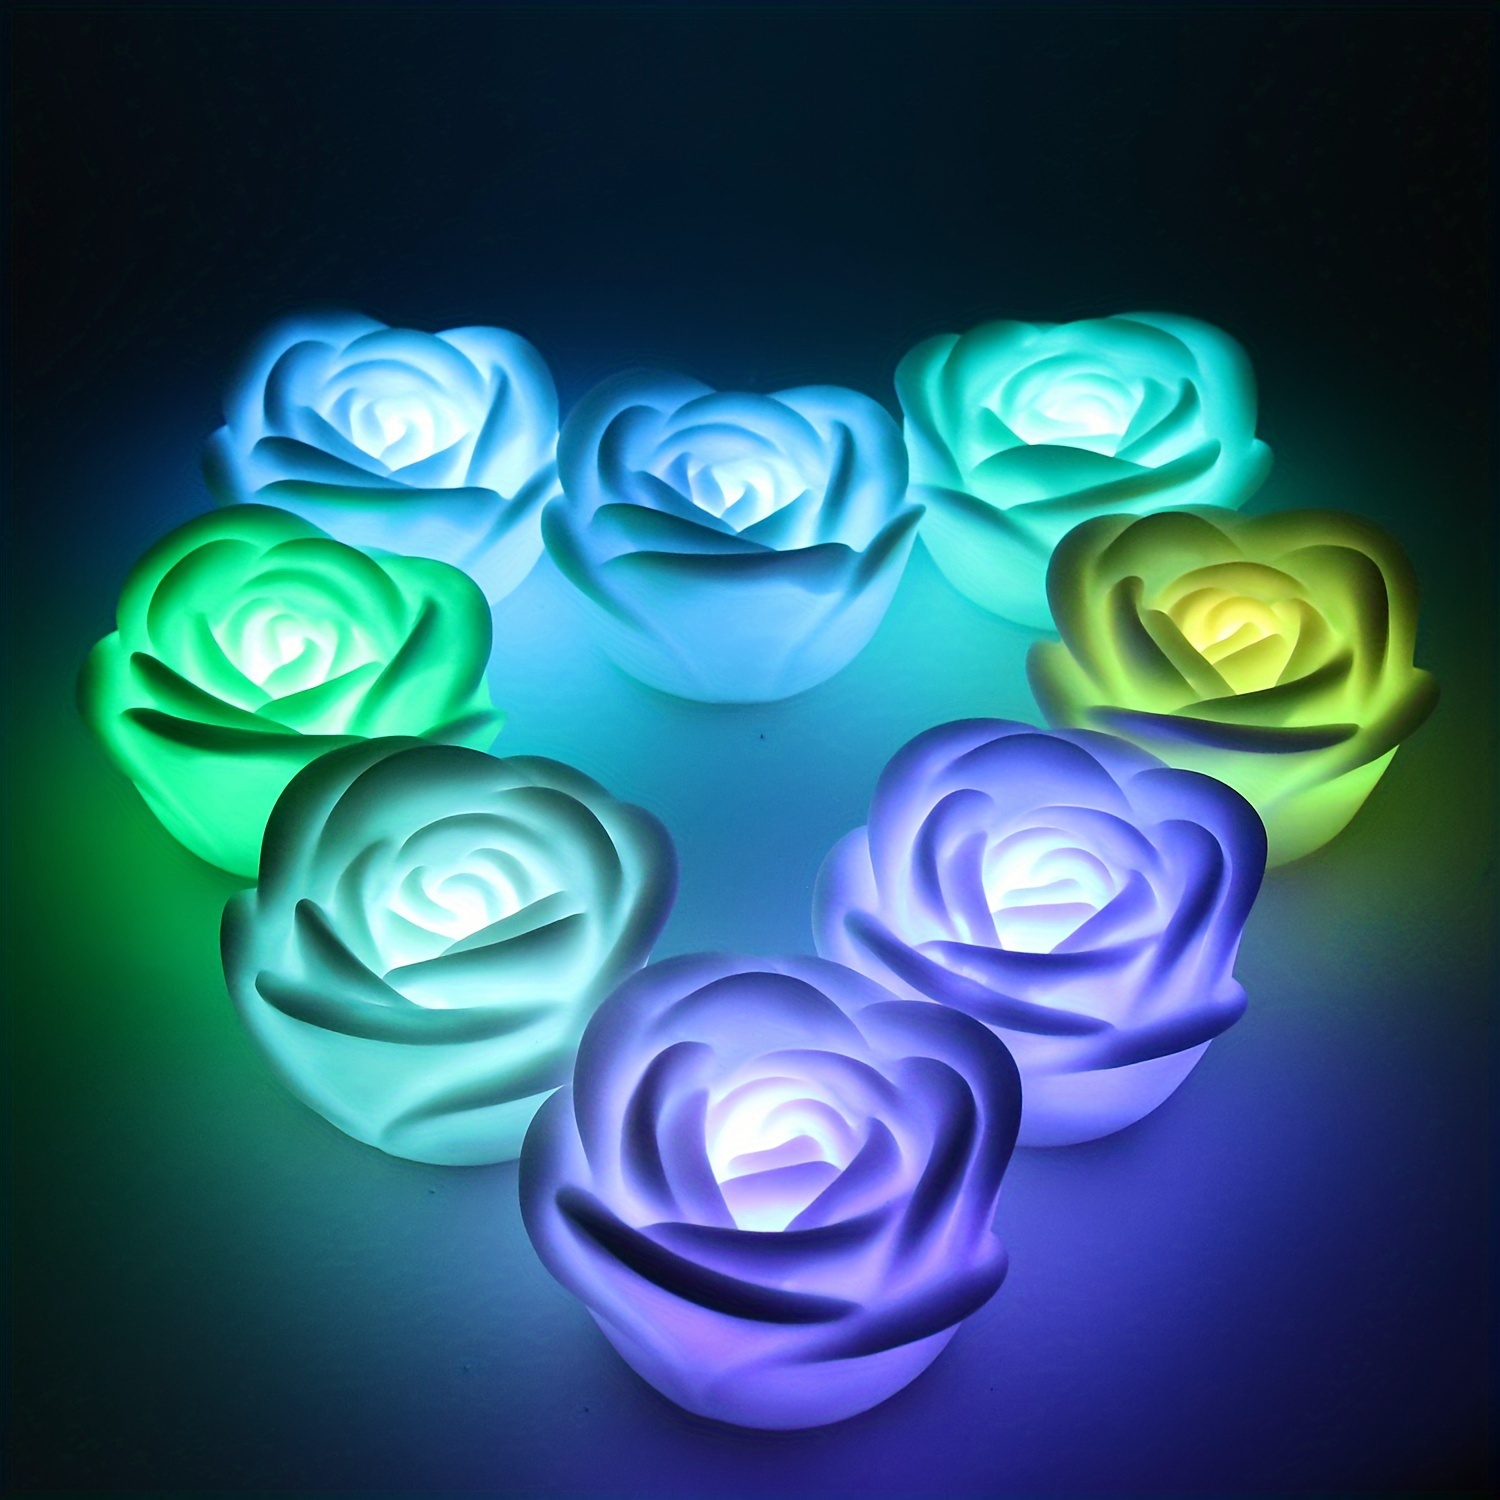 

4pcs Simulation Rose Flower Lights, Mother's Day Wedding Supplies, Party Decoration, Valentine's Day, Colorful Led Electronic Candle Lights